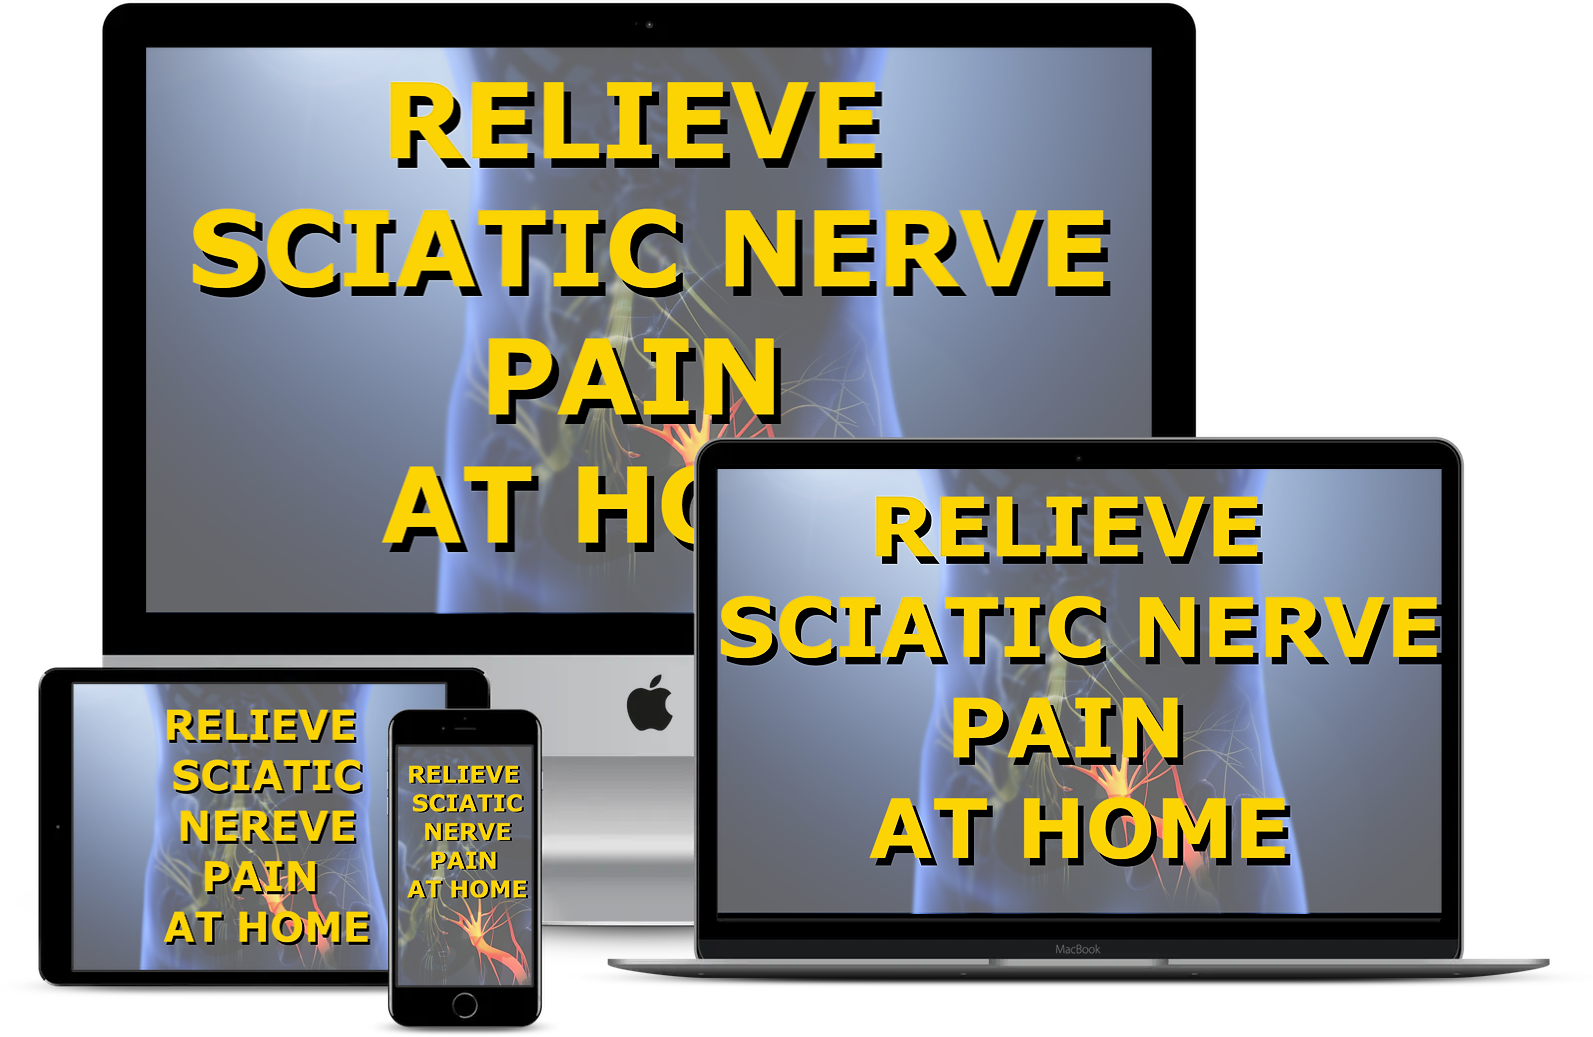 Relieve Sciatic Nerve Pain At Home